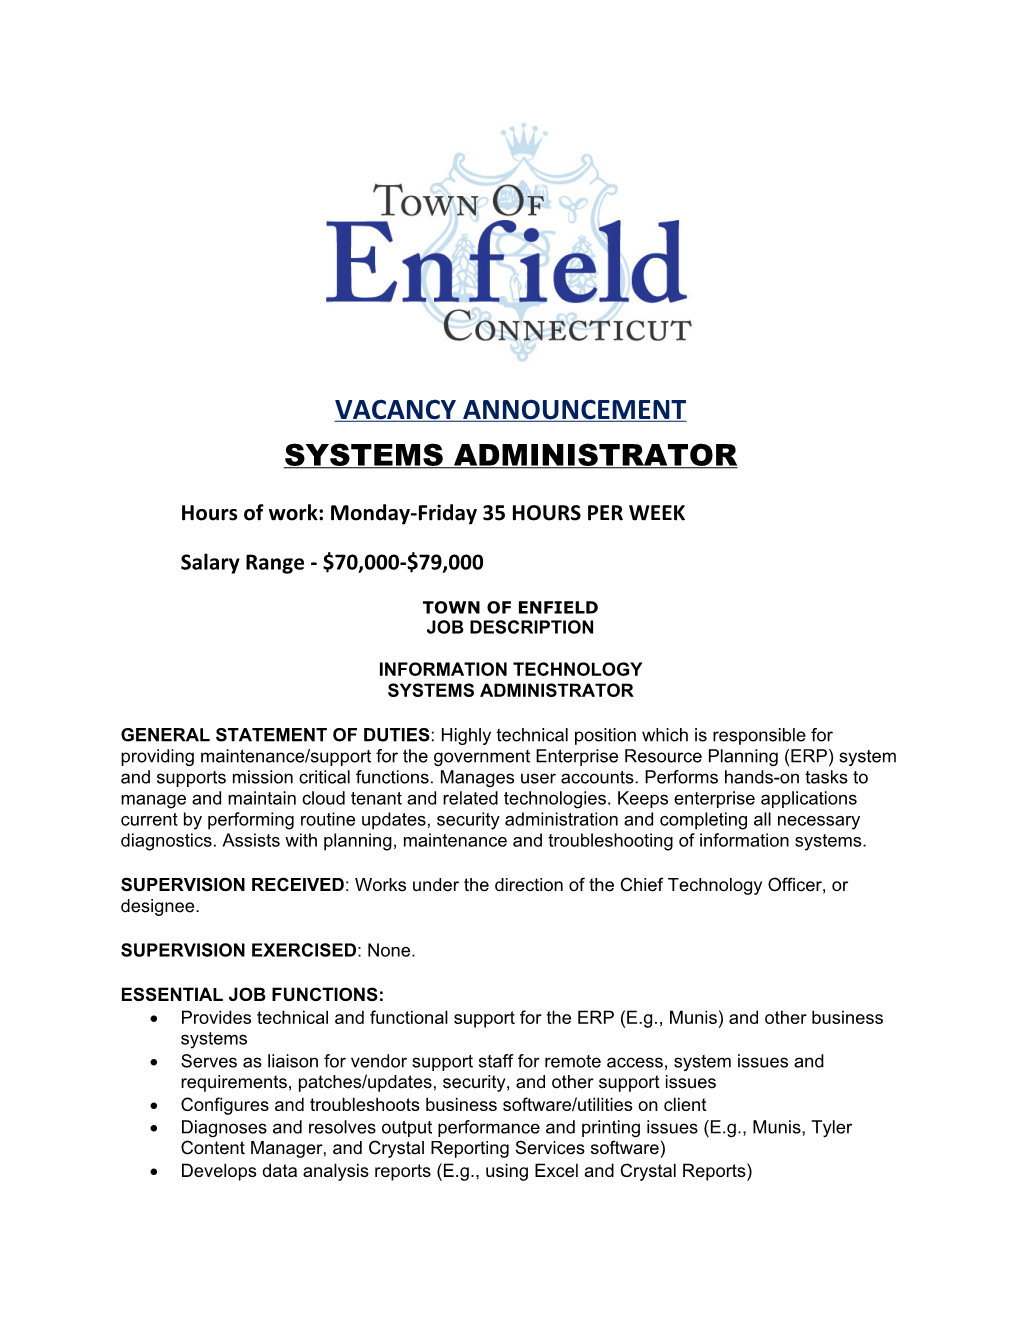 Vacancy Announcement Systems Administrator